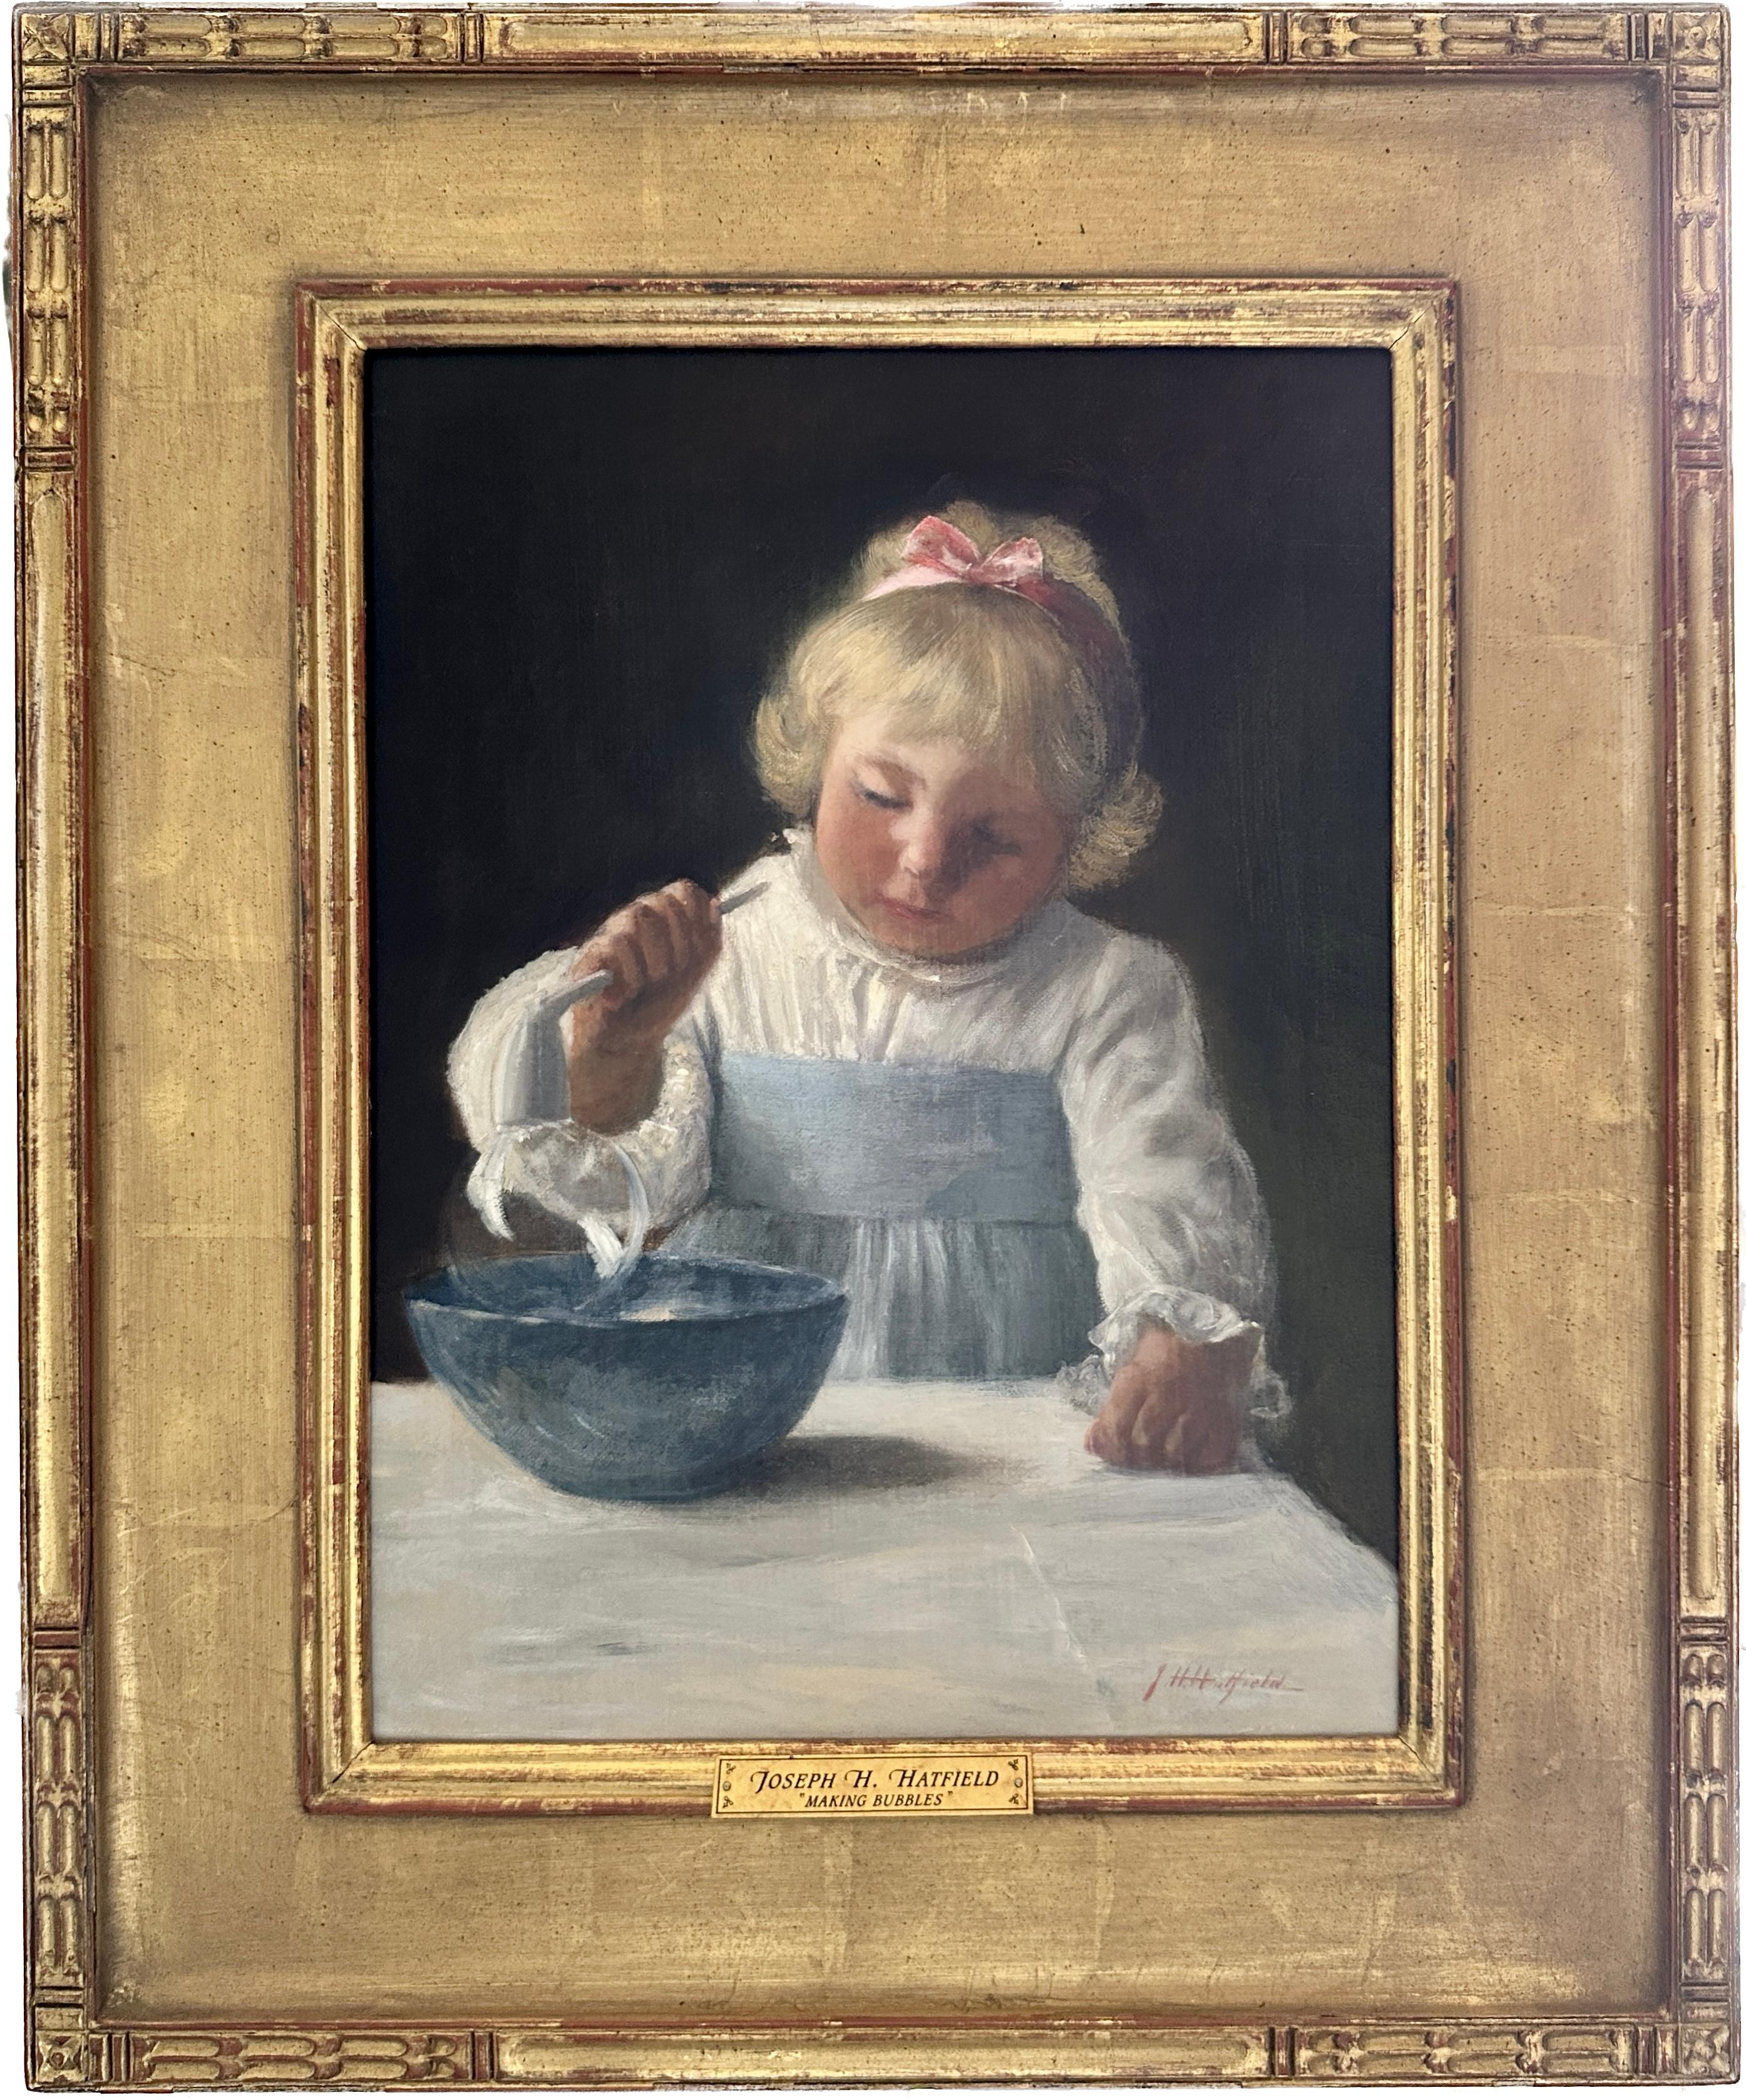 Making Bubbles - Painting by Joseph Henry Hatfield